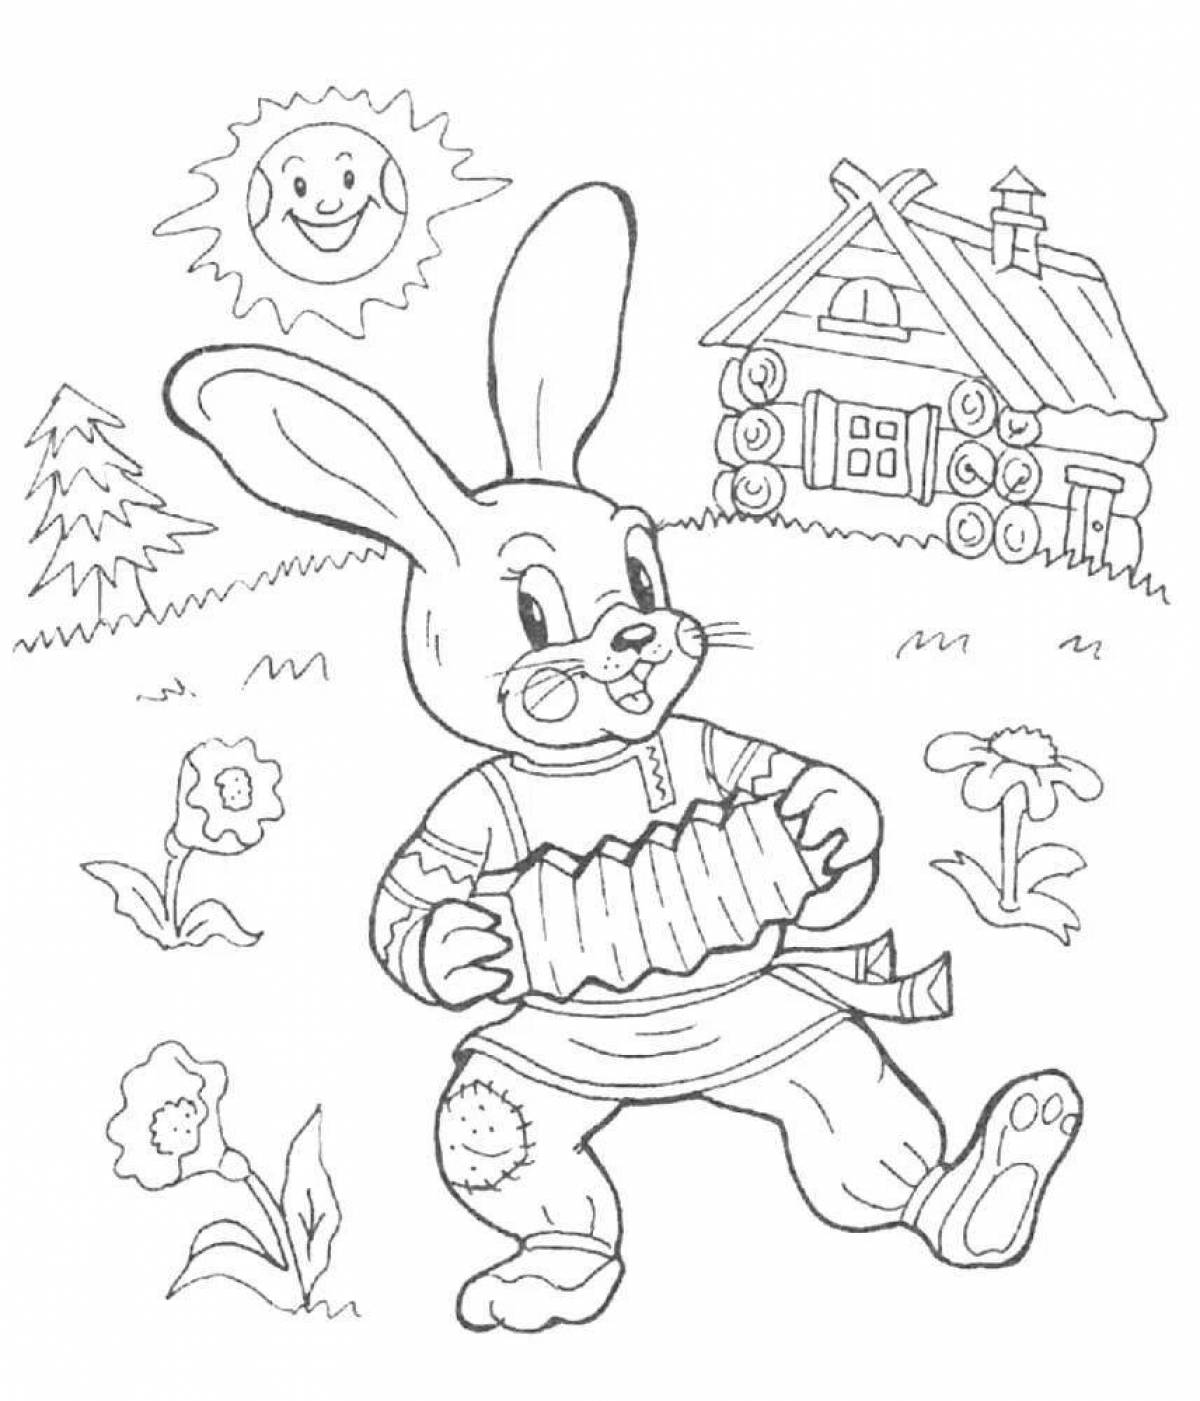 Colourful rabbit hut coloring page